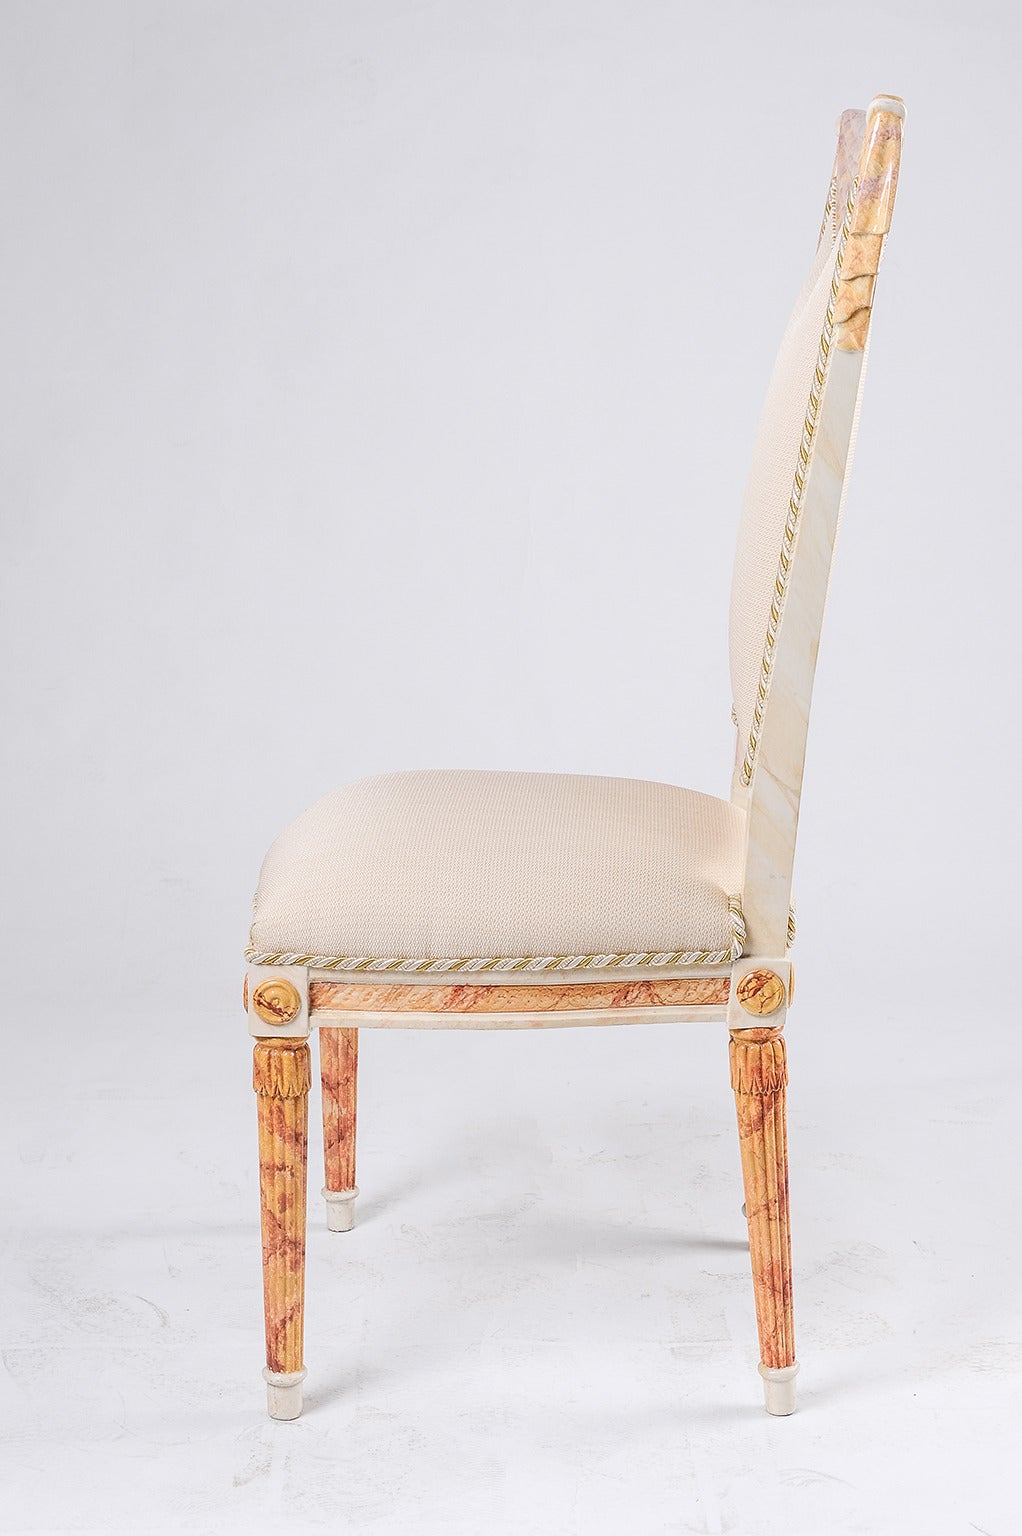 M/1040 -  Draped fanciful chair, from a Classical Roman imaginary model, - Hollywood Regency Style -
  May be a gift for the  birthday of a young girl or for a special lady !     
 It's a true sculpture, in wood lacquered and painted faux marble.
 